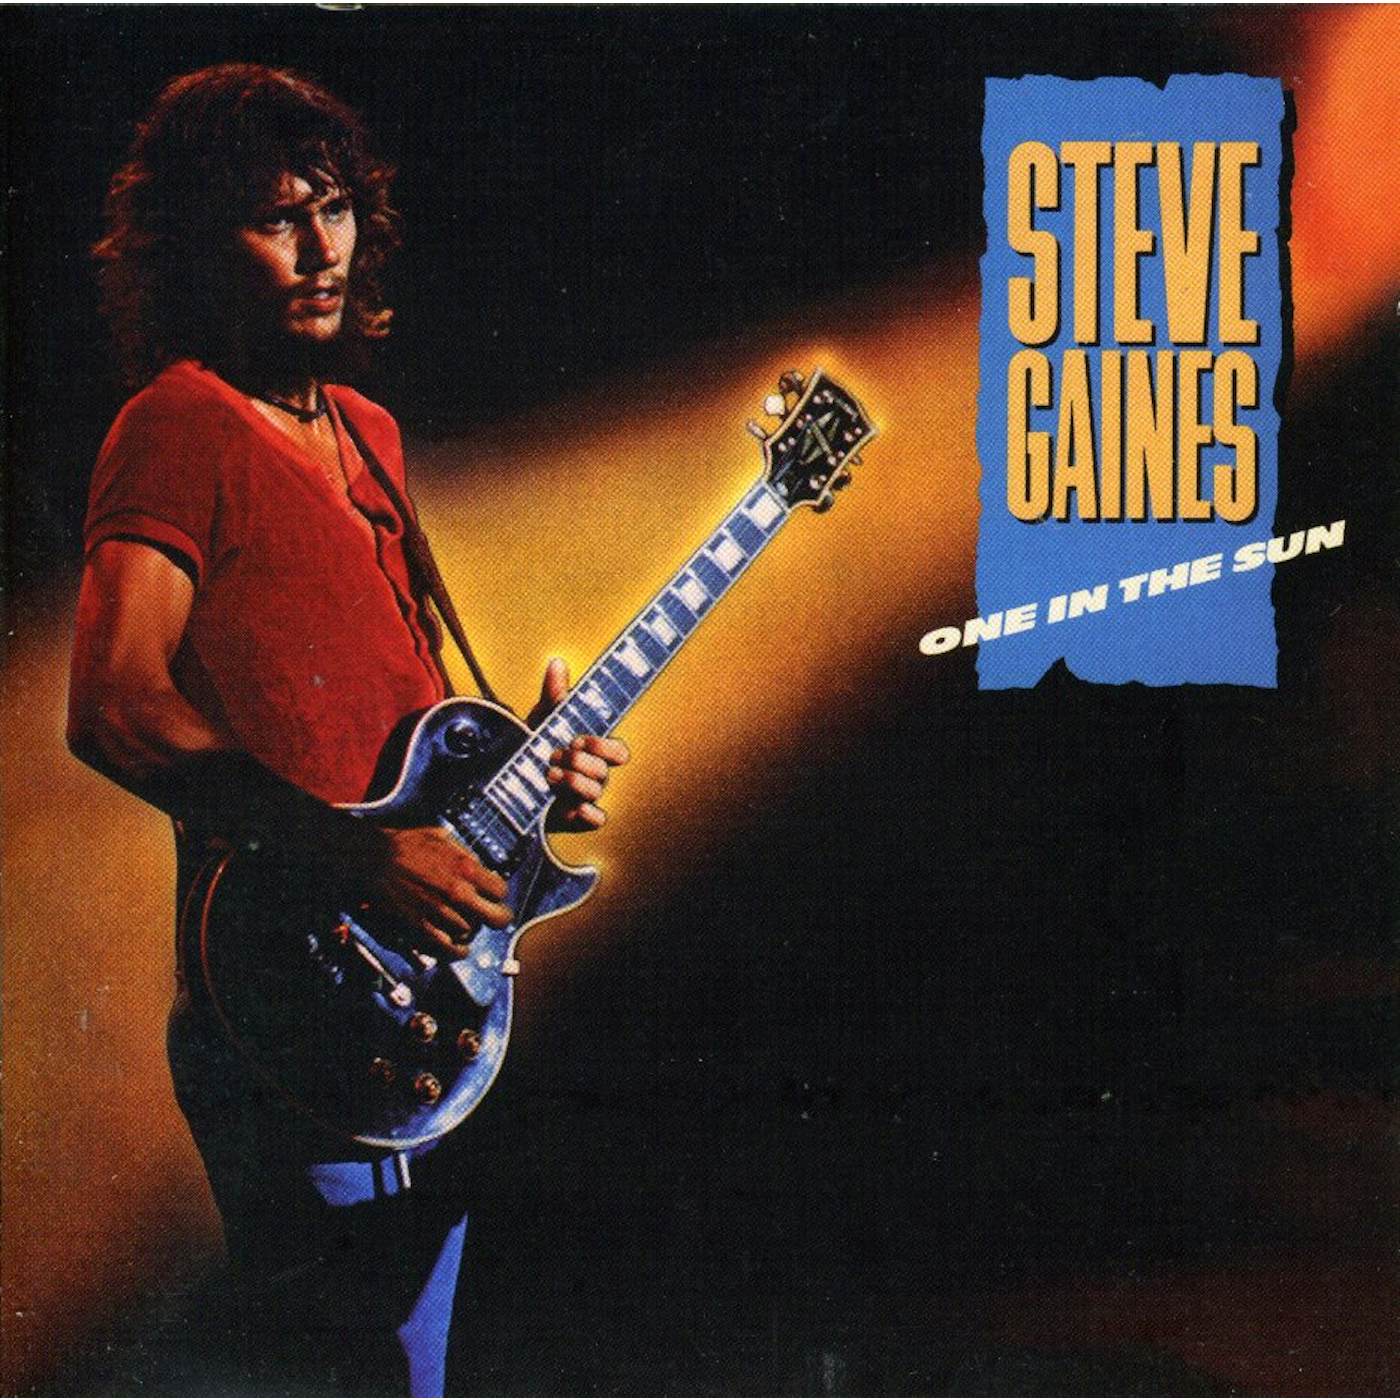 Steve Gaines ONE IN THE SUN CD